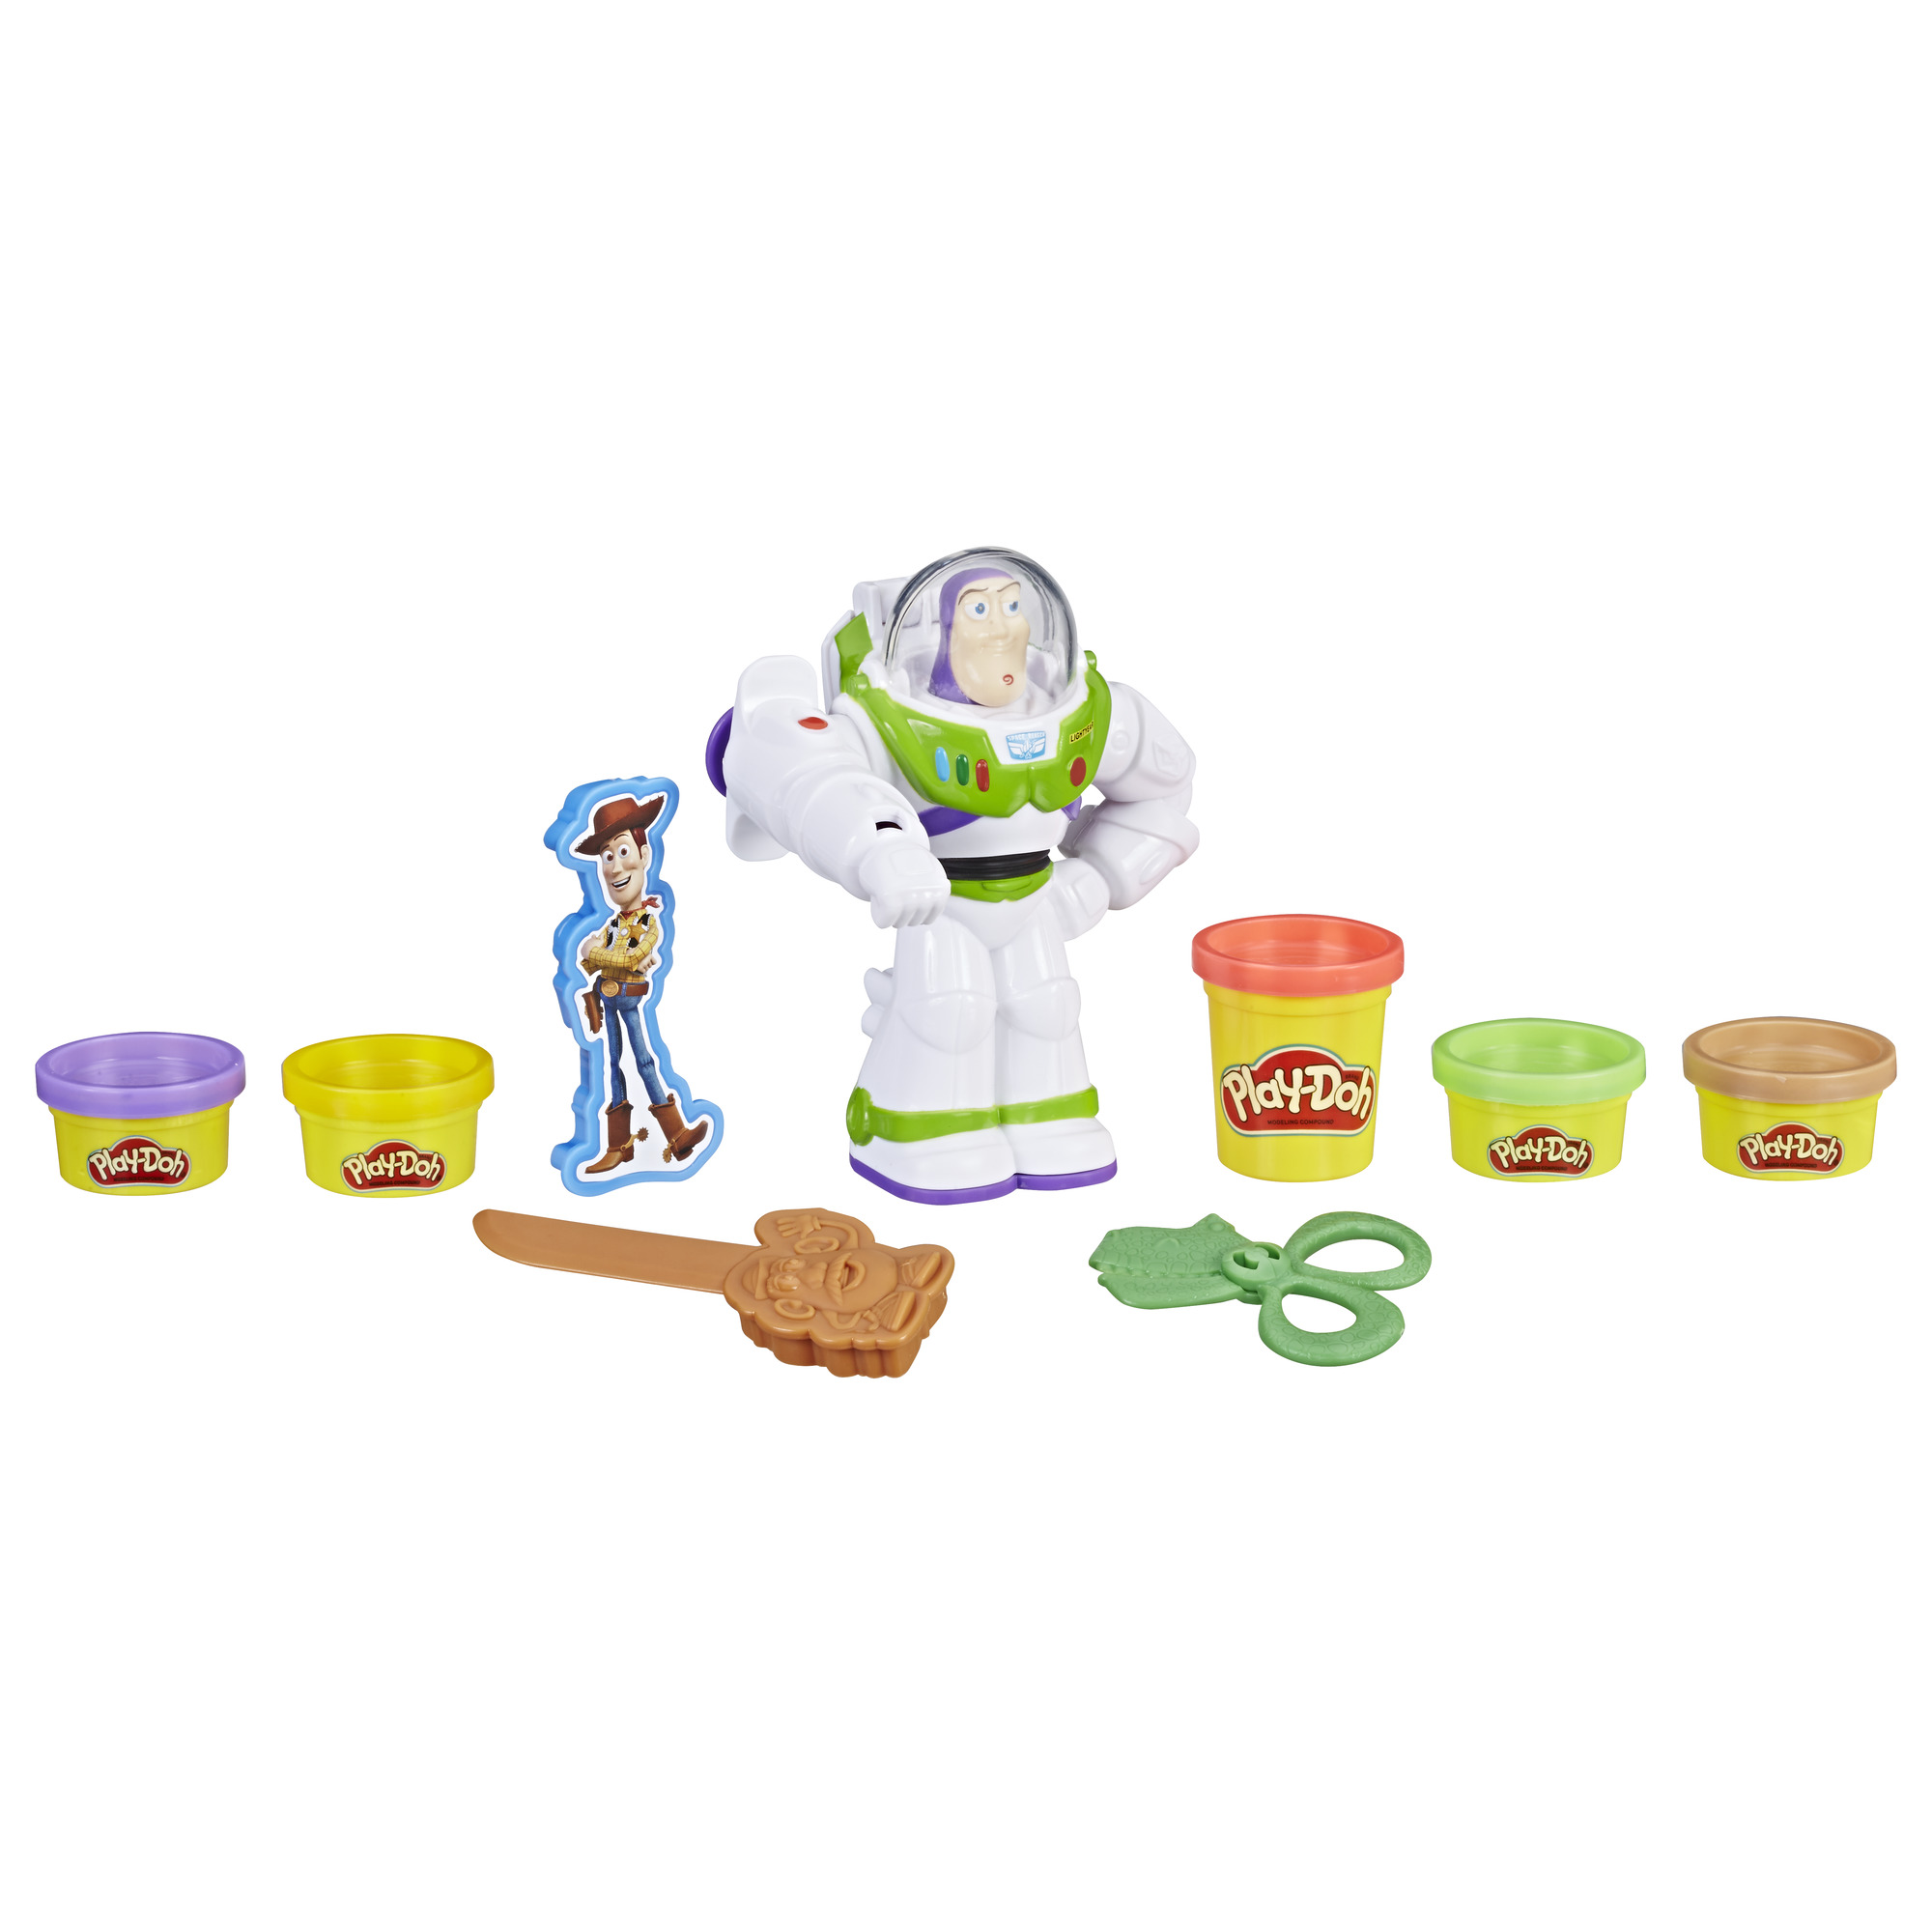 Play-Doh Disney Pixar Toy Story Buzz Lightyear Set with 5 Cans (6 Ounces Total) - image 3 of 15